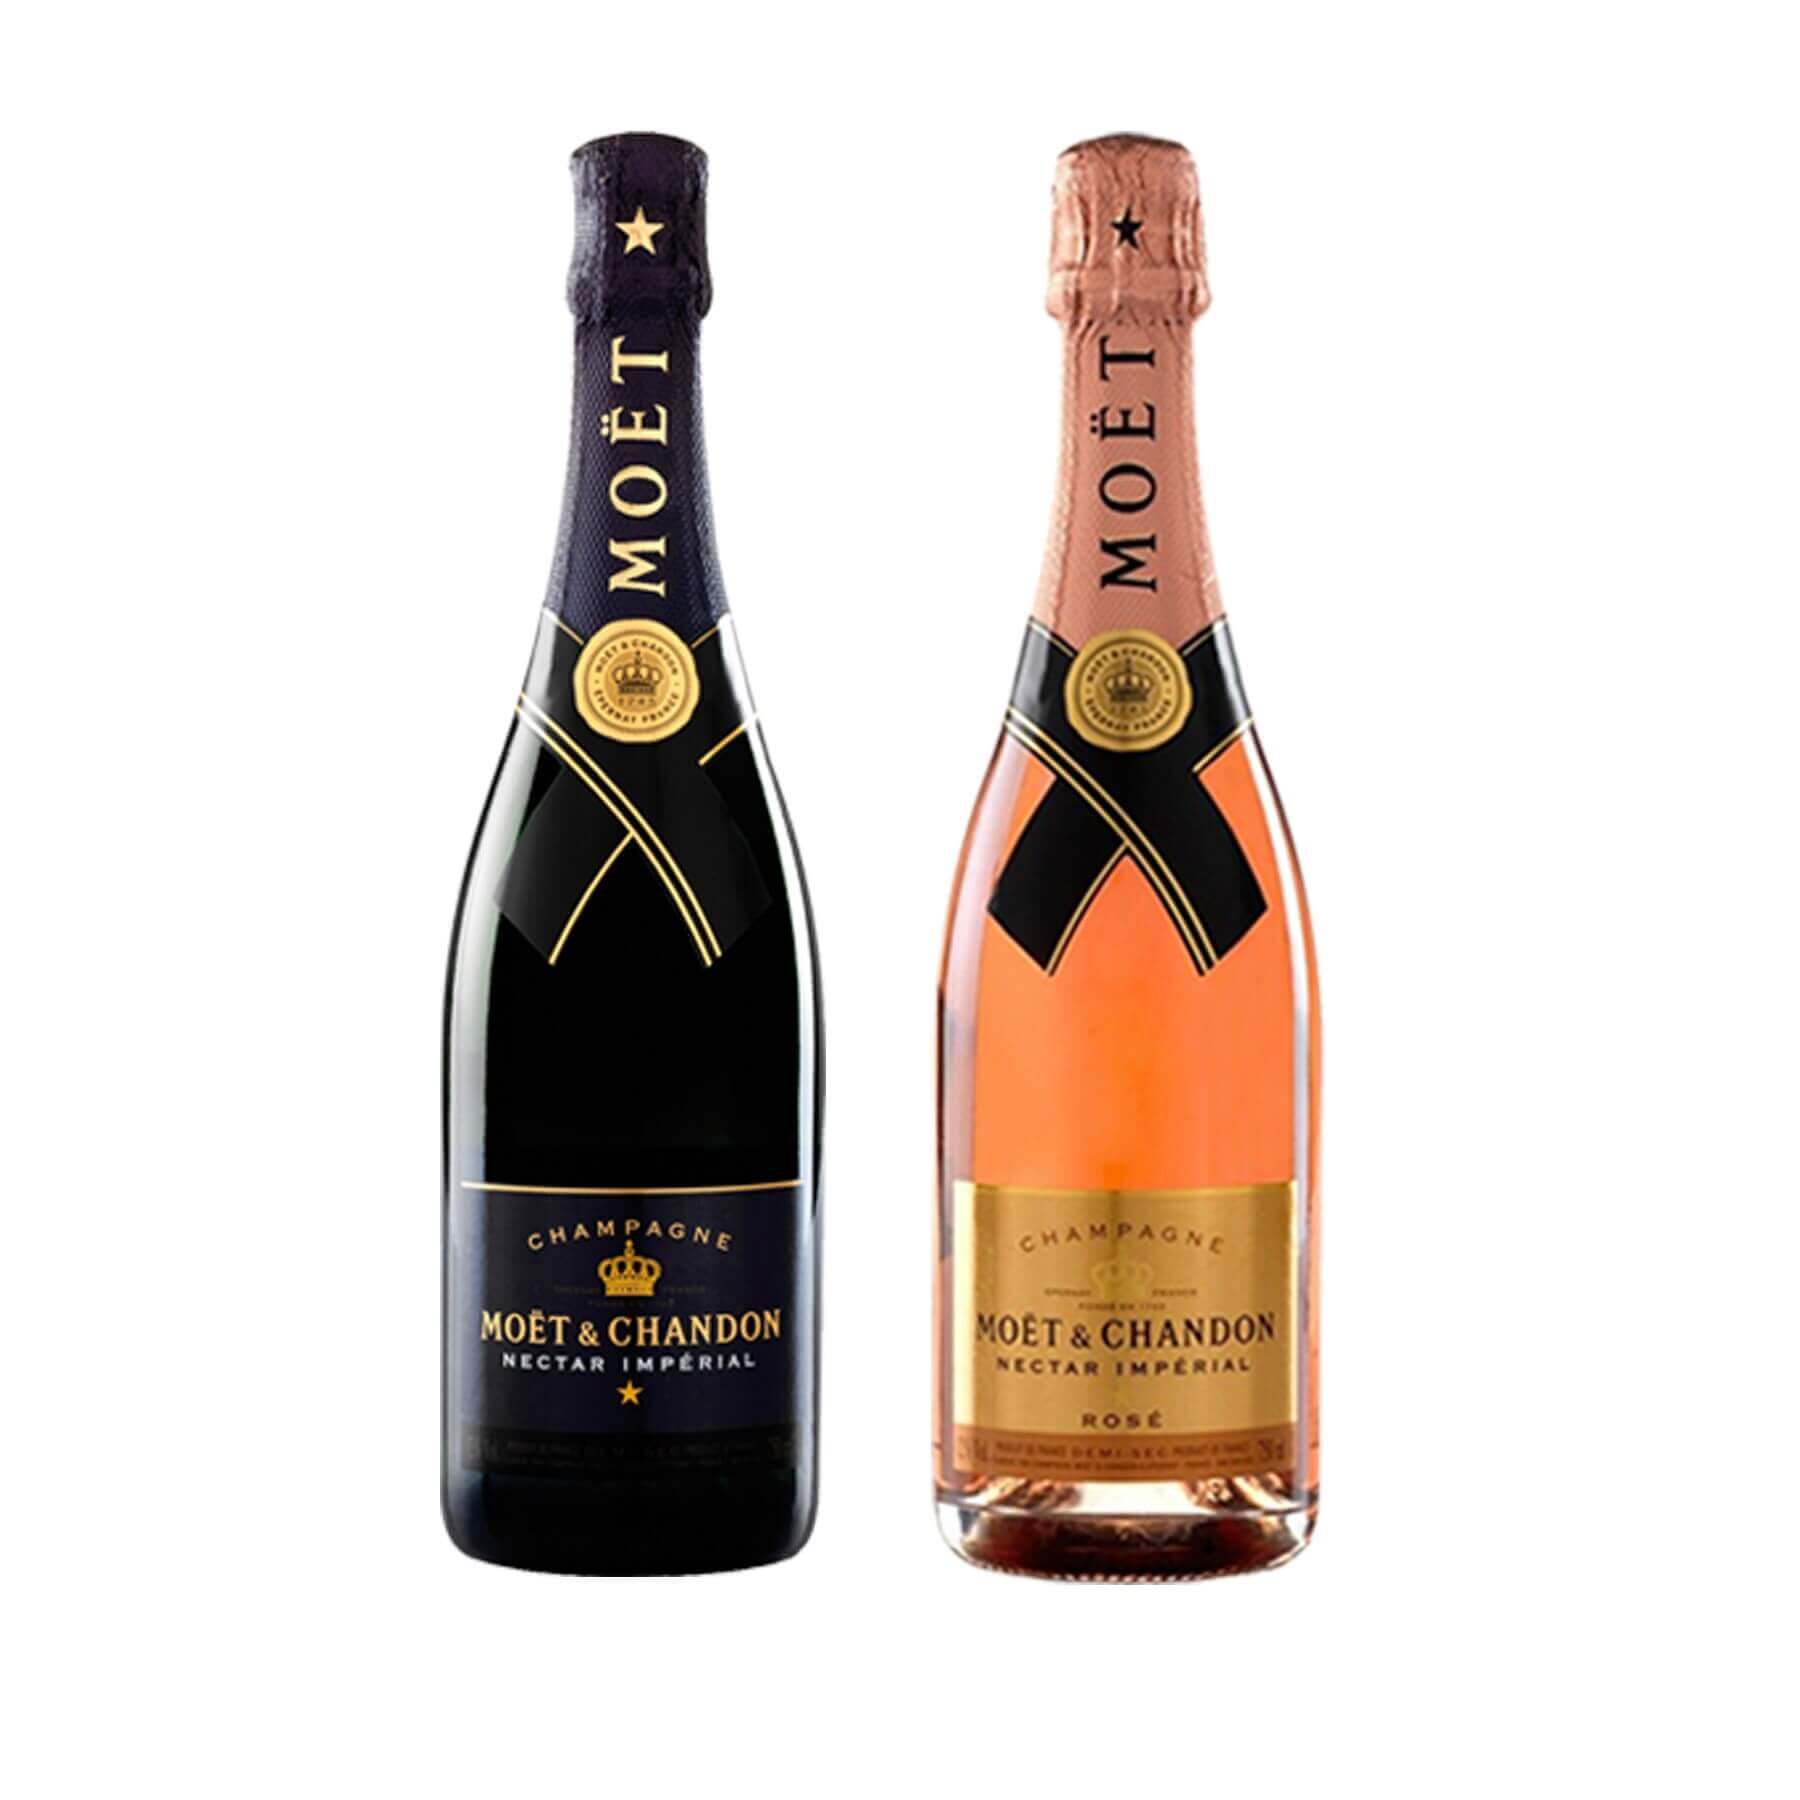 Moet & Chandon Rose Imperial - Rosé Sparkling Wine from Champagne France